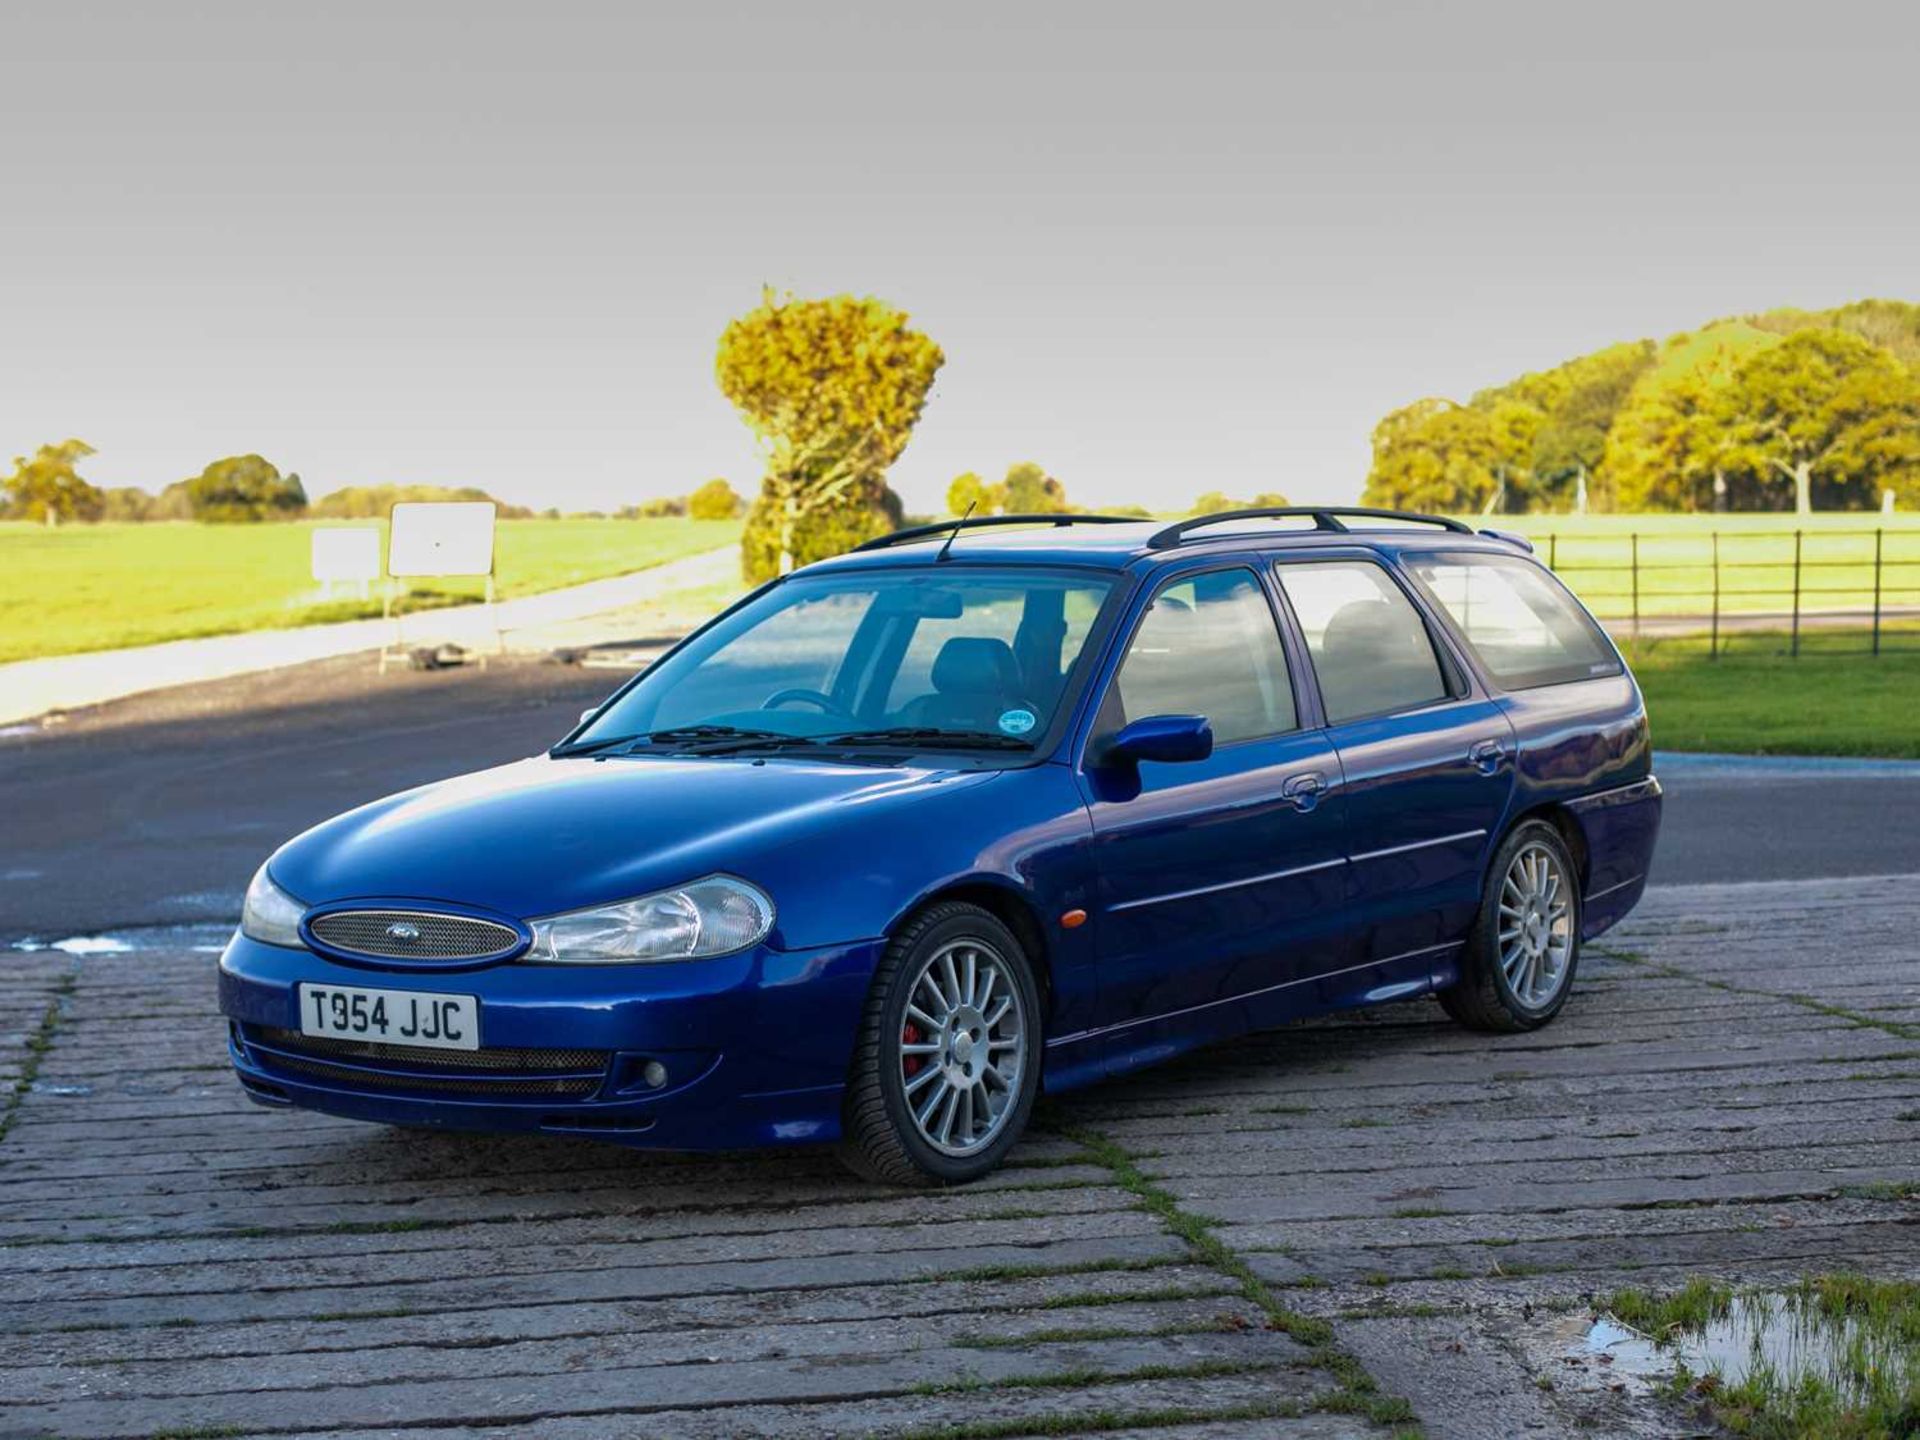 1999 Ford Mondeo ST200 Estate ***NO RESERVE*** Thought to be one of just 15 ST200 load-luggers, stil - Image 4 of 75